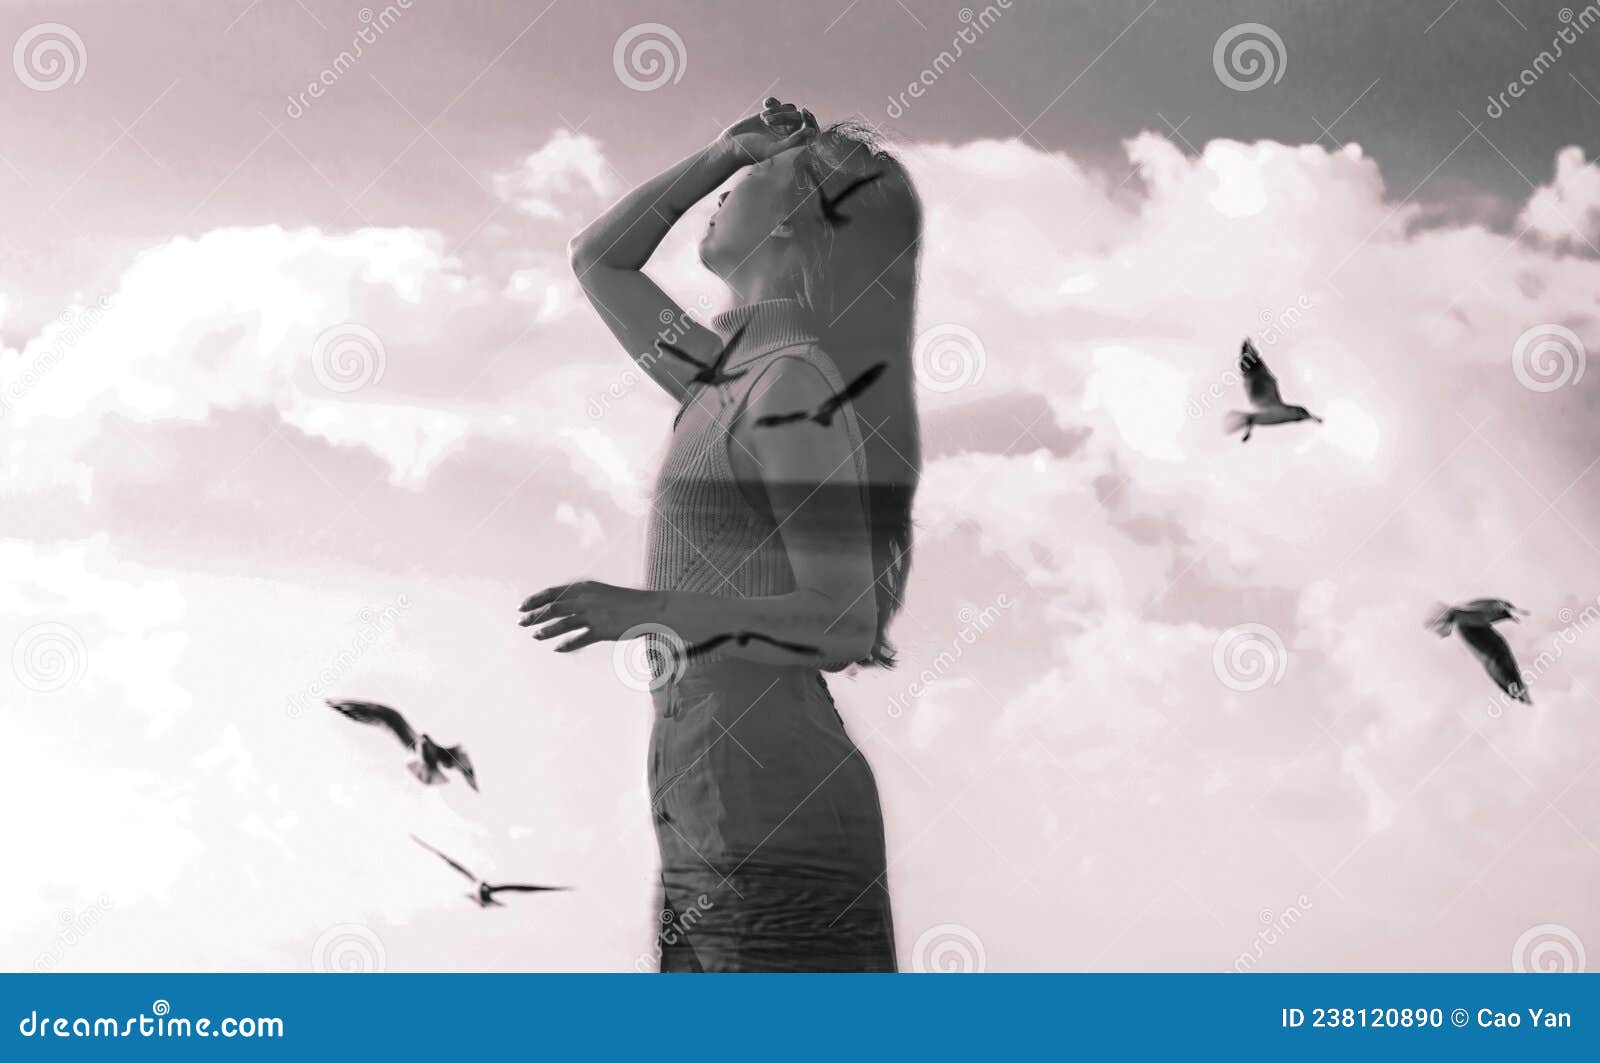 https://thumbs.dreamstime.com/z/double-exposure-portrait-young-woman-combined-photograph-flying-bird-sunset-reflecting-ocean-conceptual-image-showing-238120890.jpg